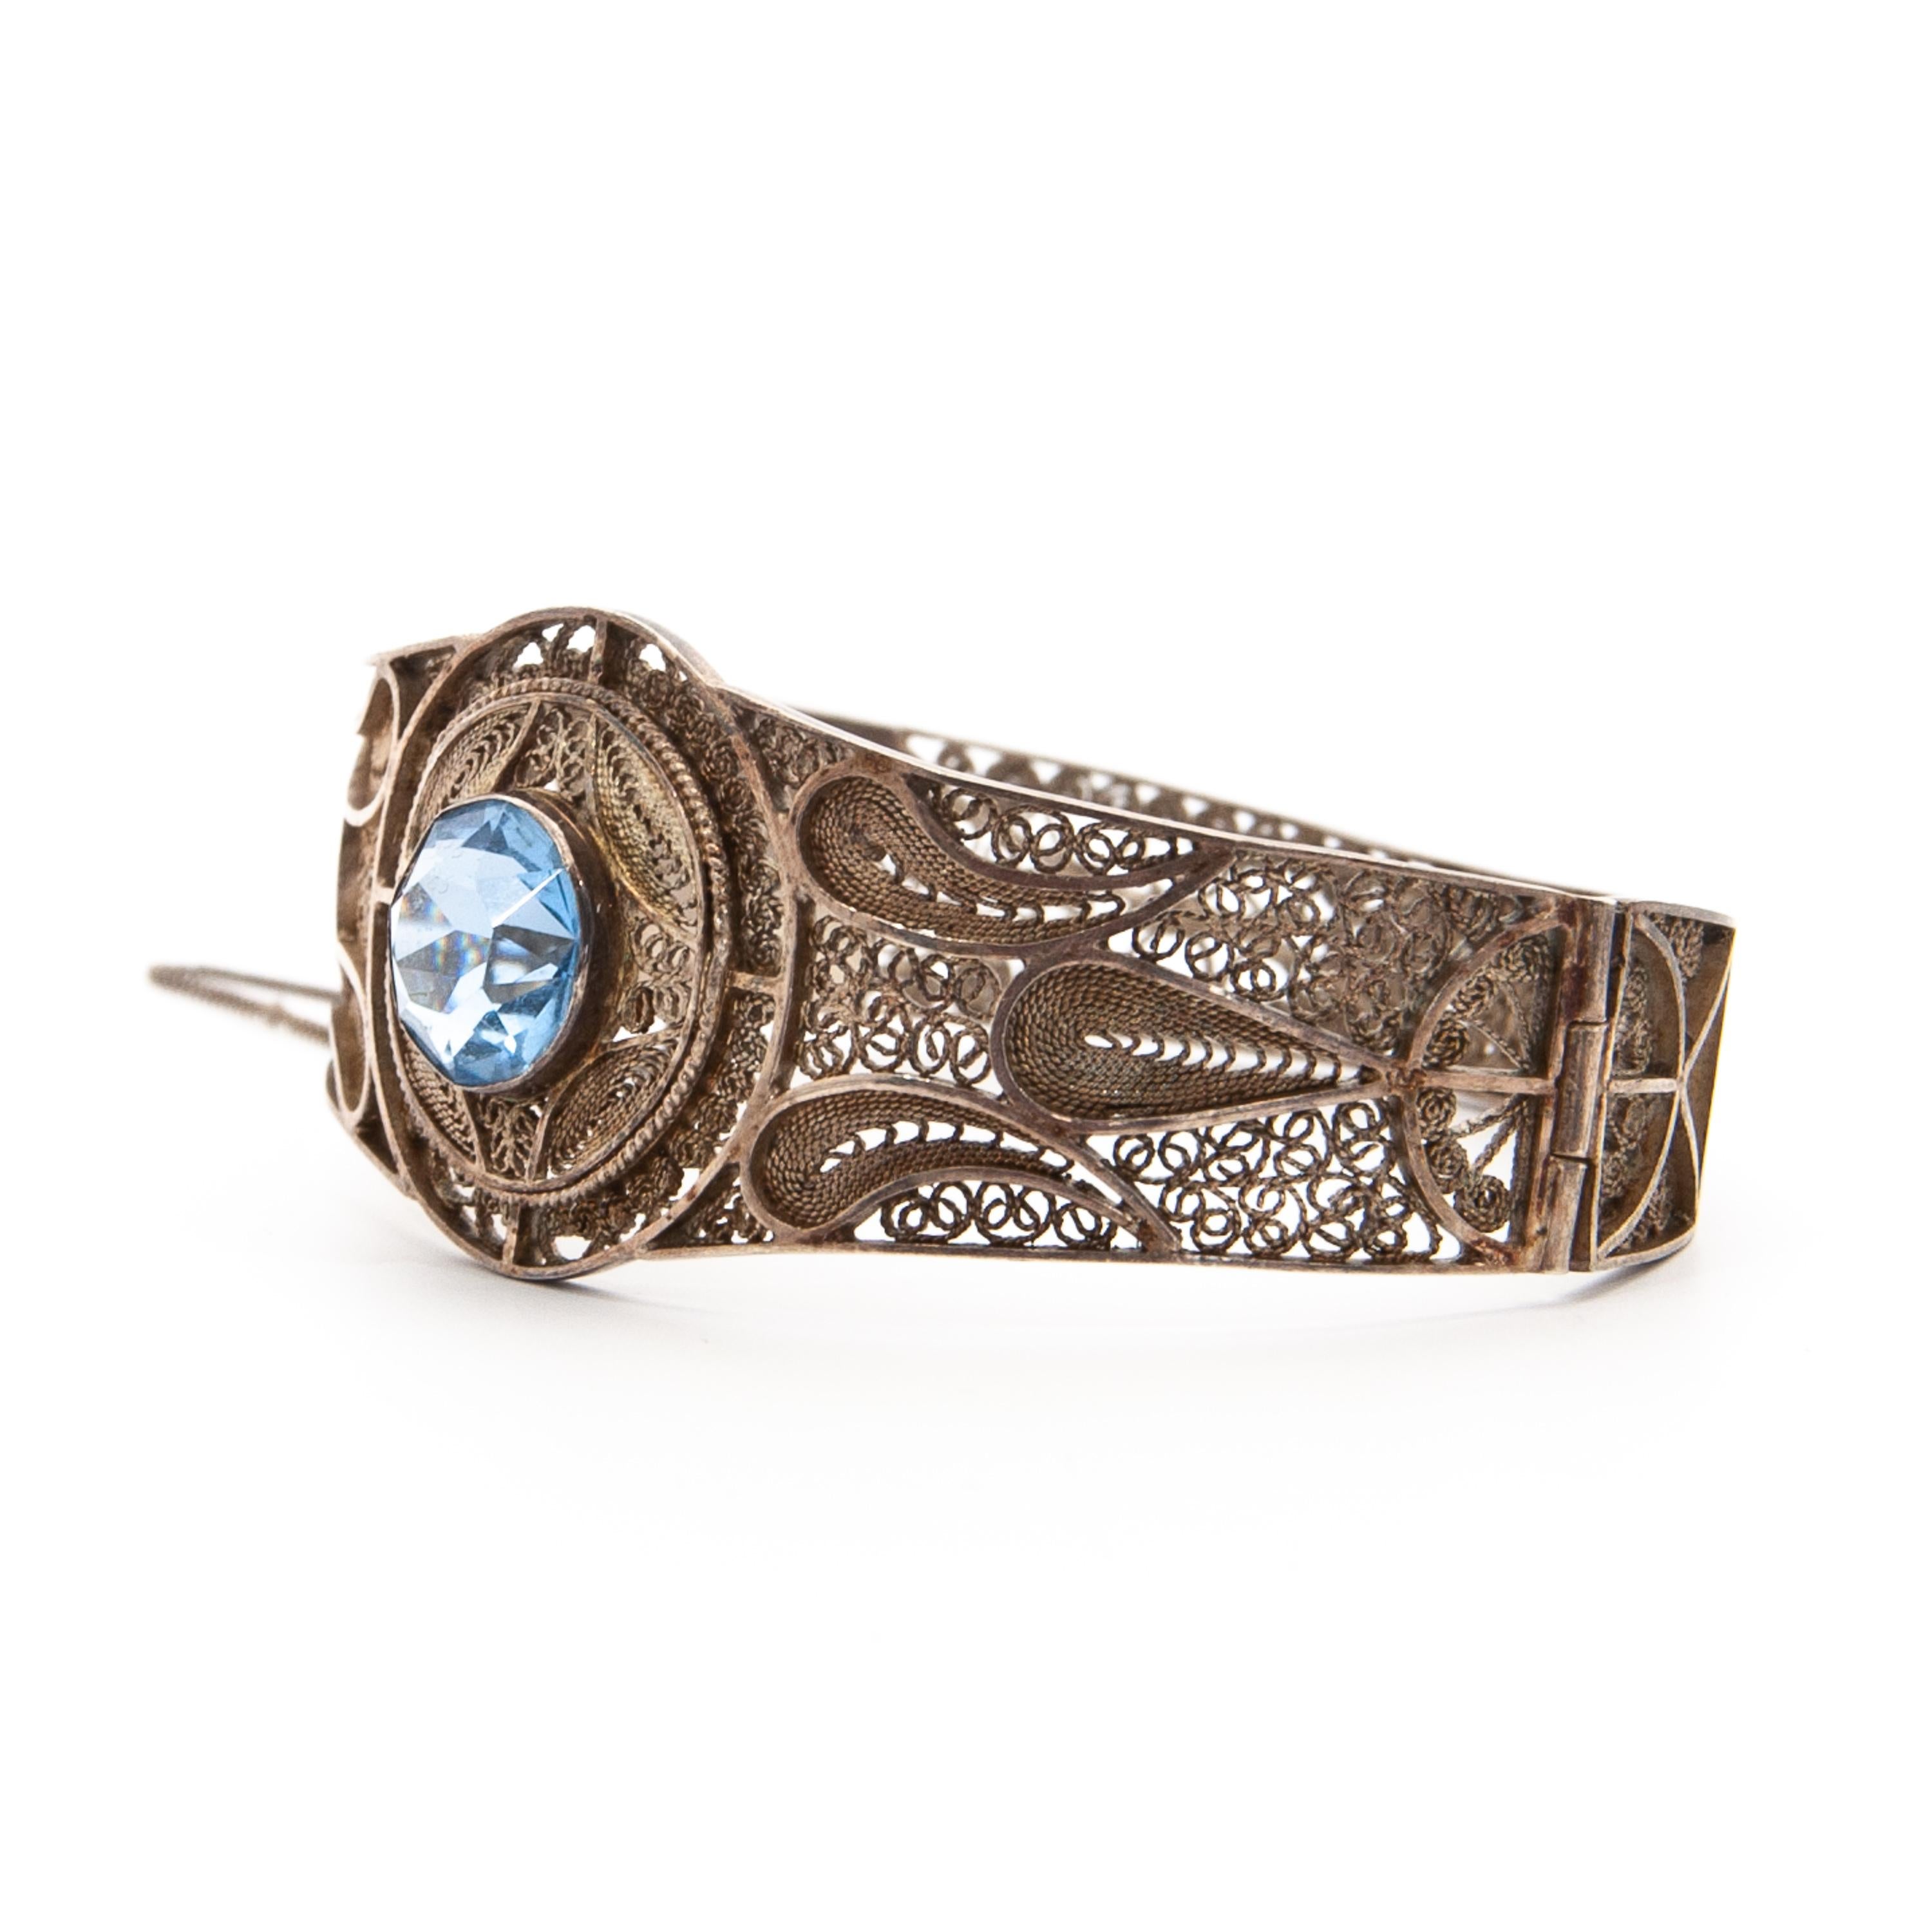 An Art Nouveau-style silver bangle bracelet set with a blue stone. This gorgeous handmade bracelet is made of genuine 835 silver, studded with one big blue stone in the center in aquamarine color. The filigree is very fine and delicate detailed,